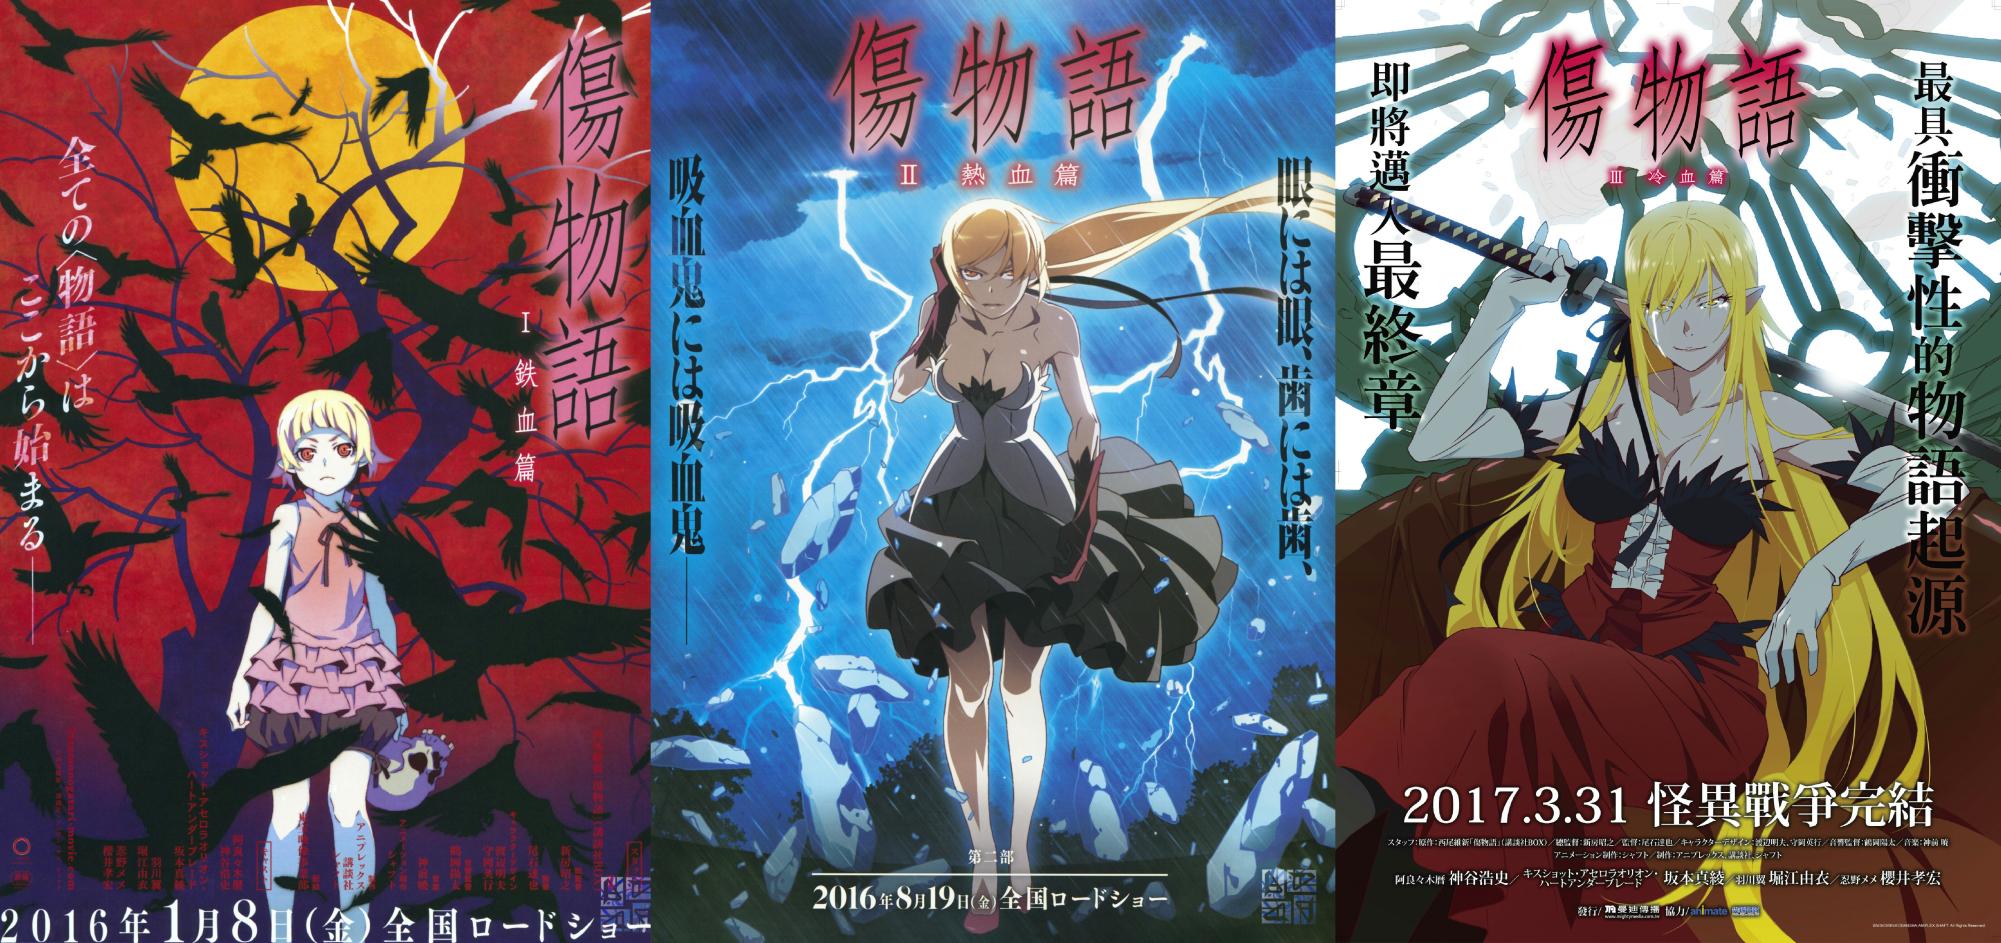 All three of the Kizumonogatari movie posters made to advertise the films releases.